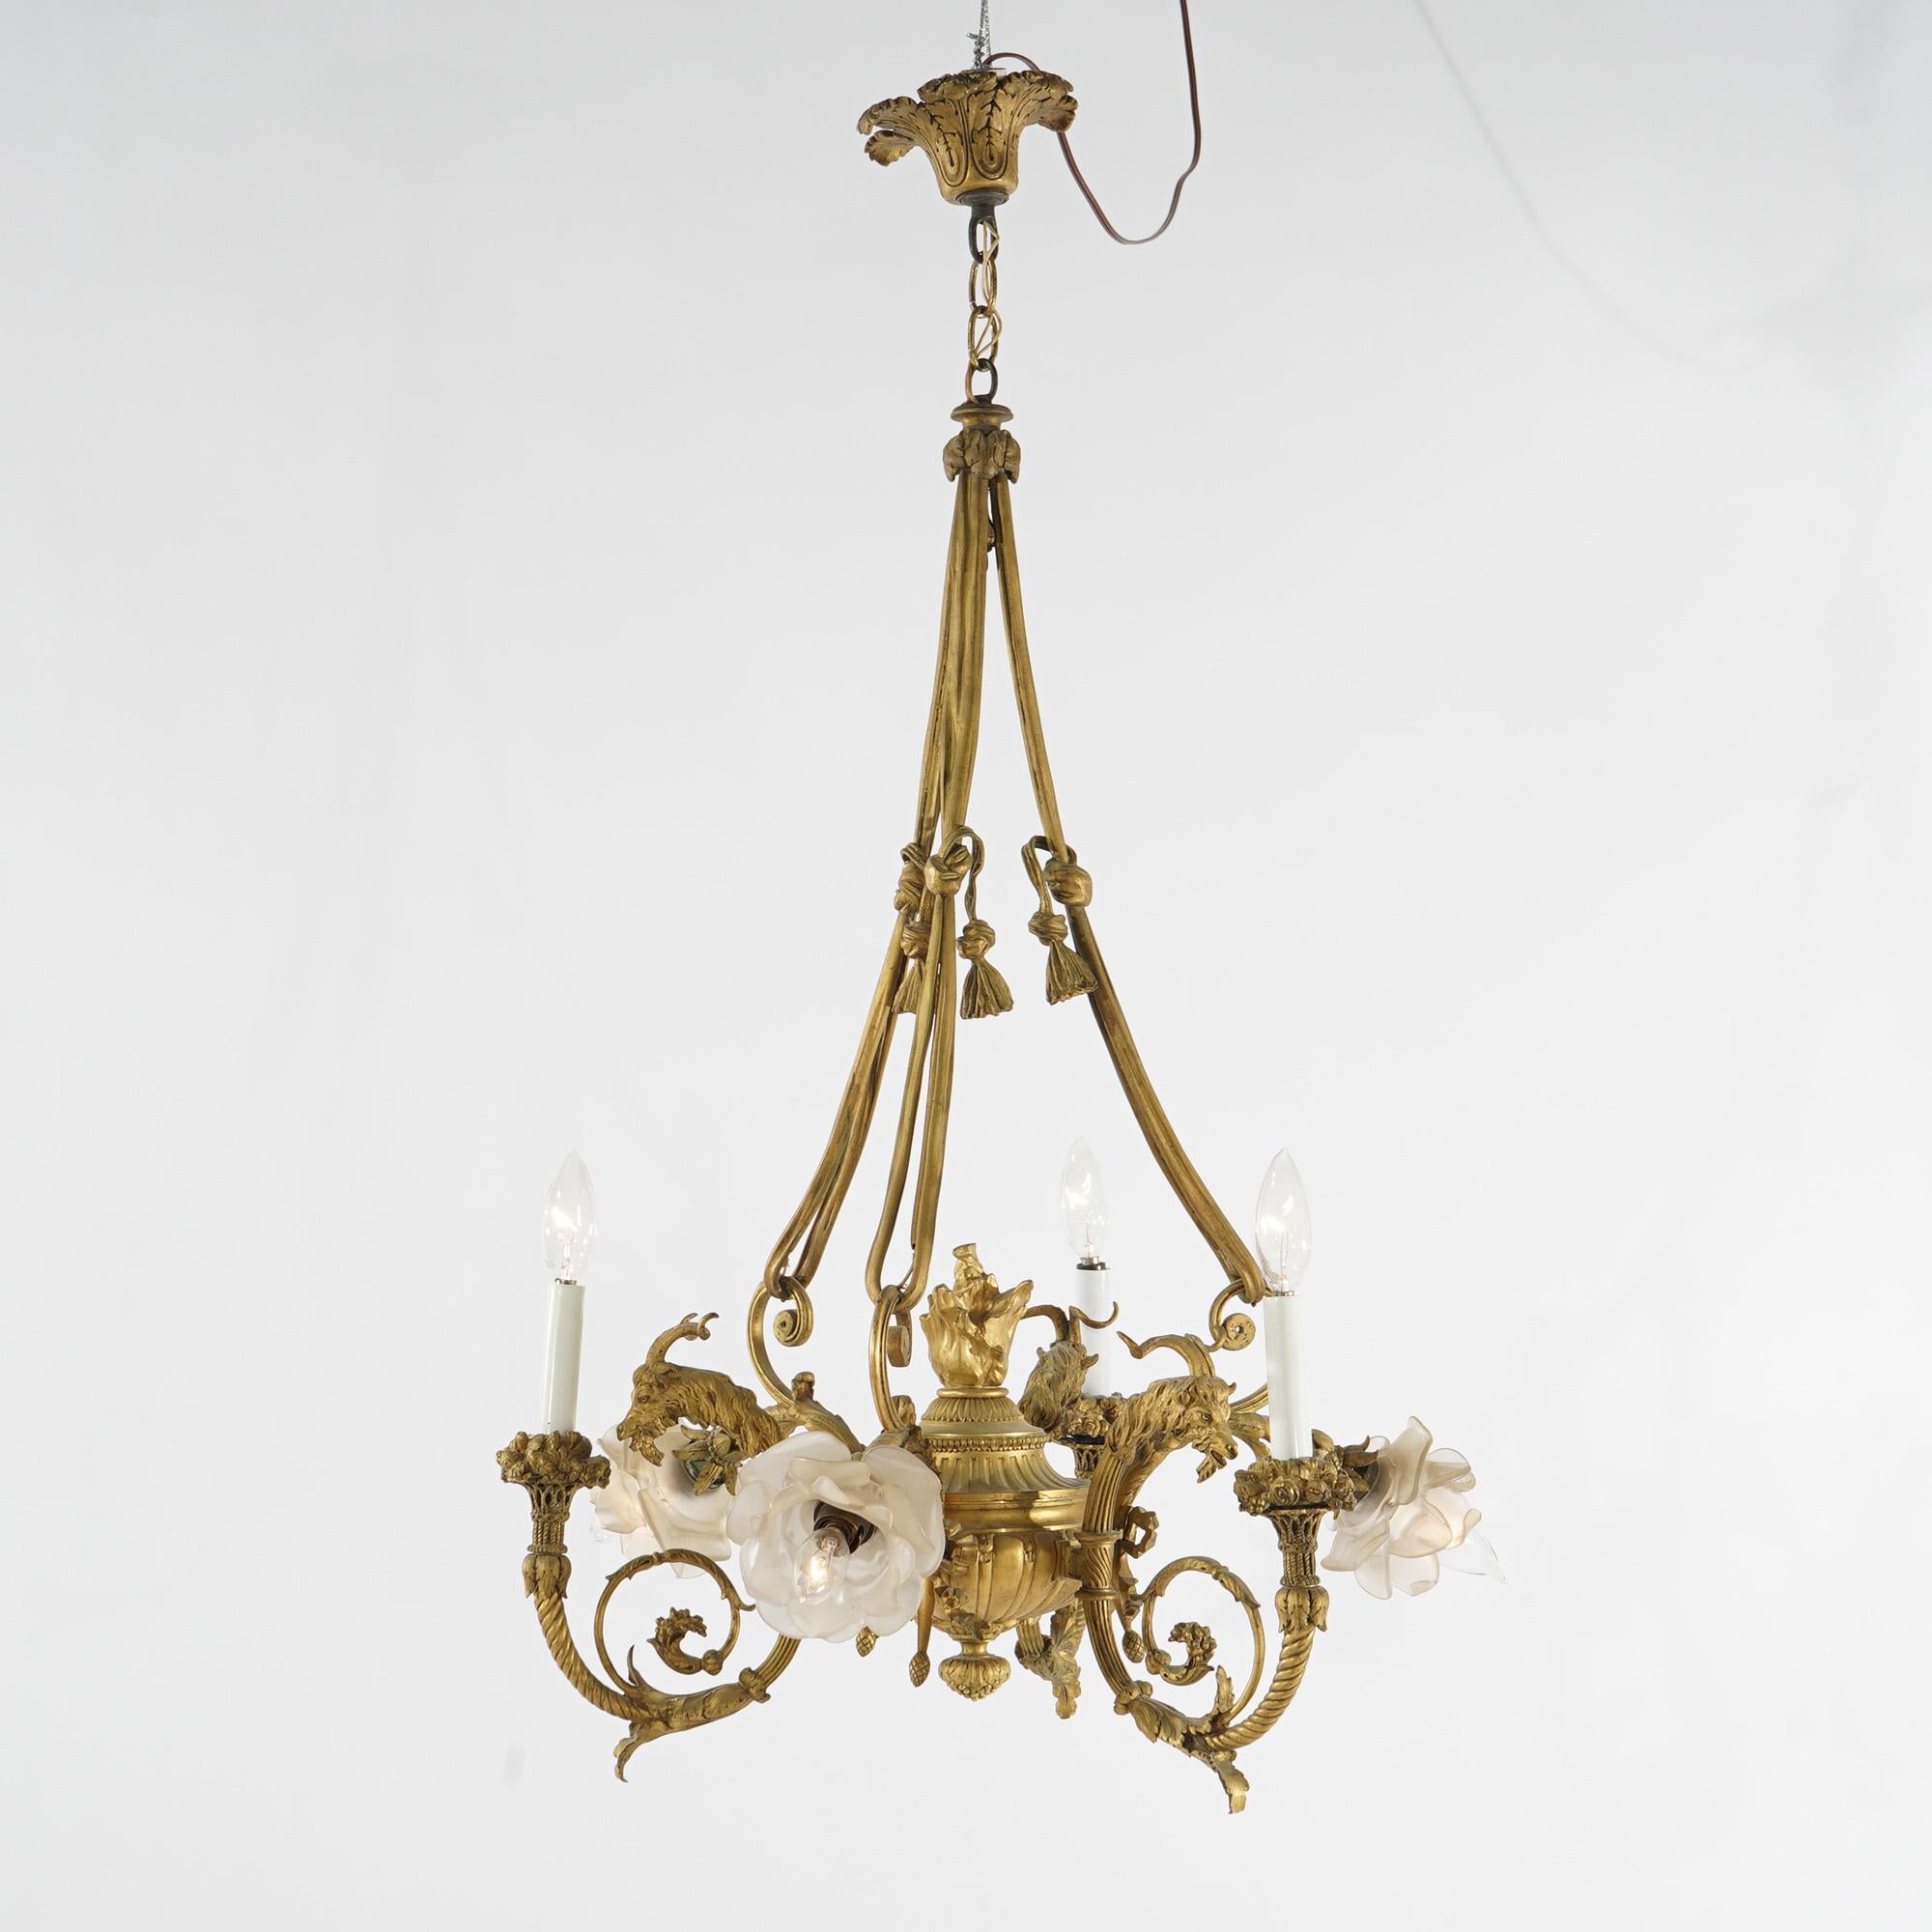 Antique French Empire chandelier offers gilt cast bronze frame in tassel, scroll and foliate form with six arms terminating in candle lights, c1920

Measures - 38